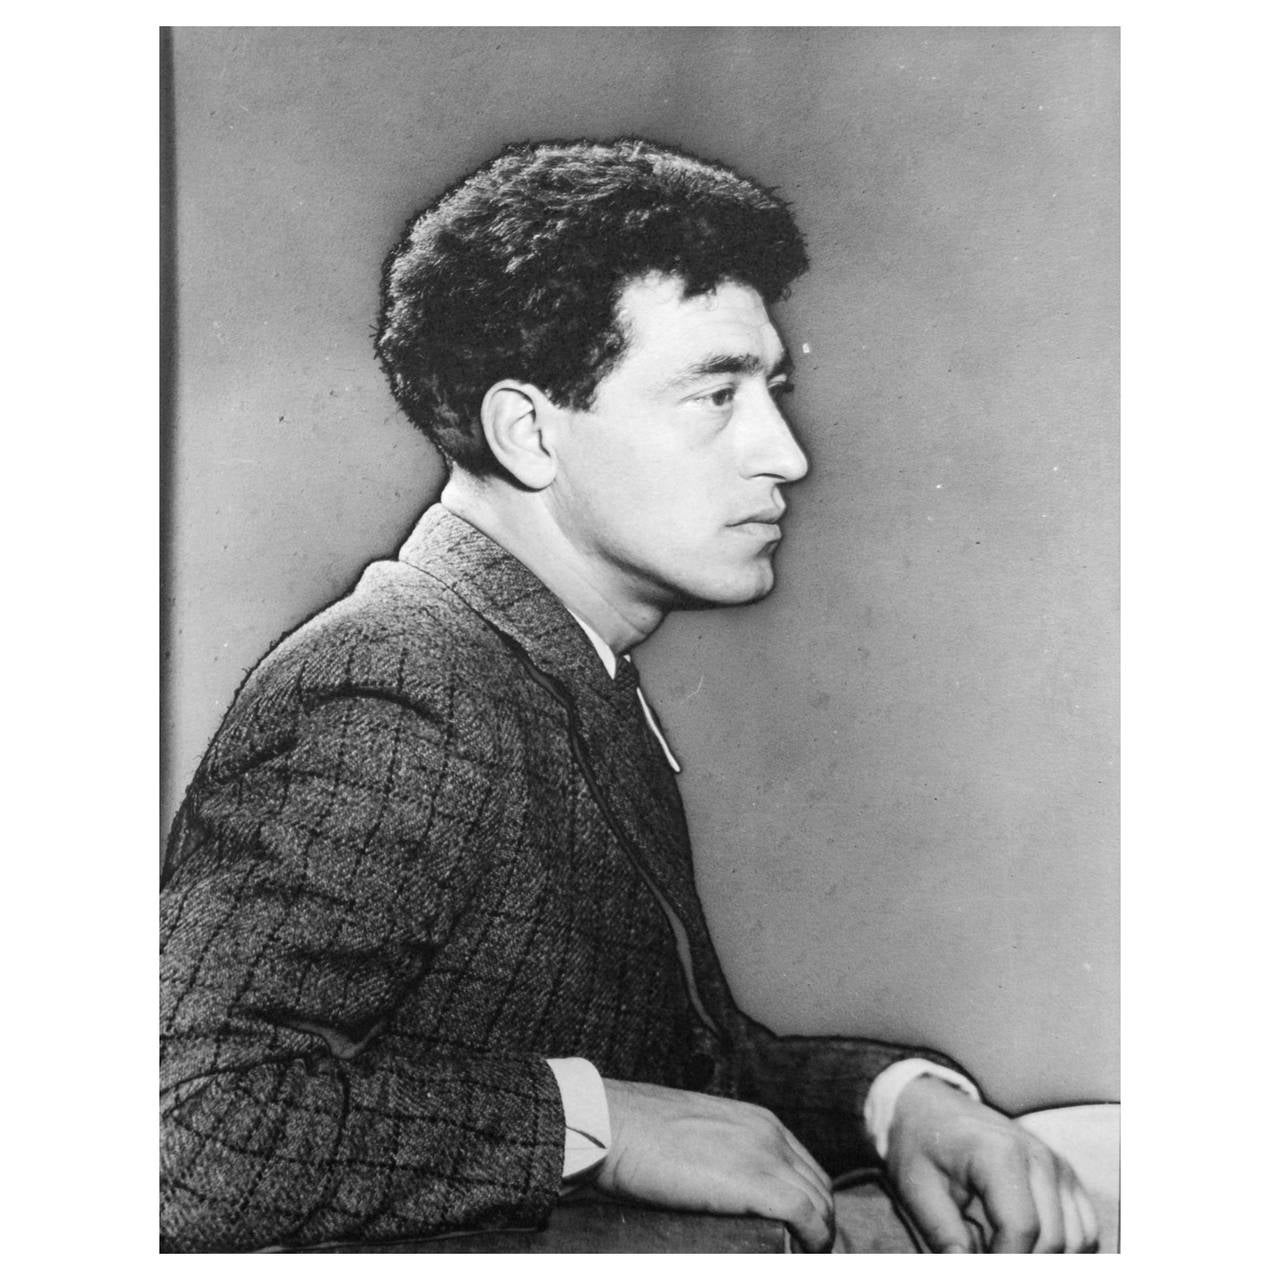 Man Ray Photograph of Giacometti, 1930

A posthumous print from the original negative in 1977 by Pierre Gassmann.

Gelatin silver bromide 30,5 x 24

Man Ray 1890 – 1976) was an American visual artist who spent most of his career in France. He